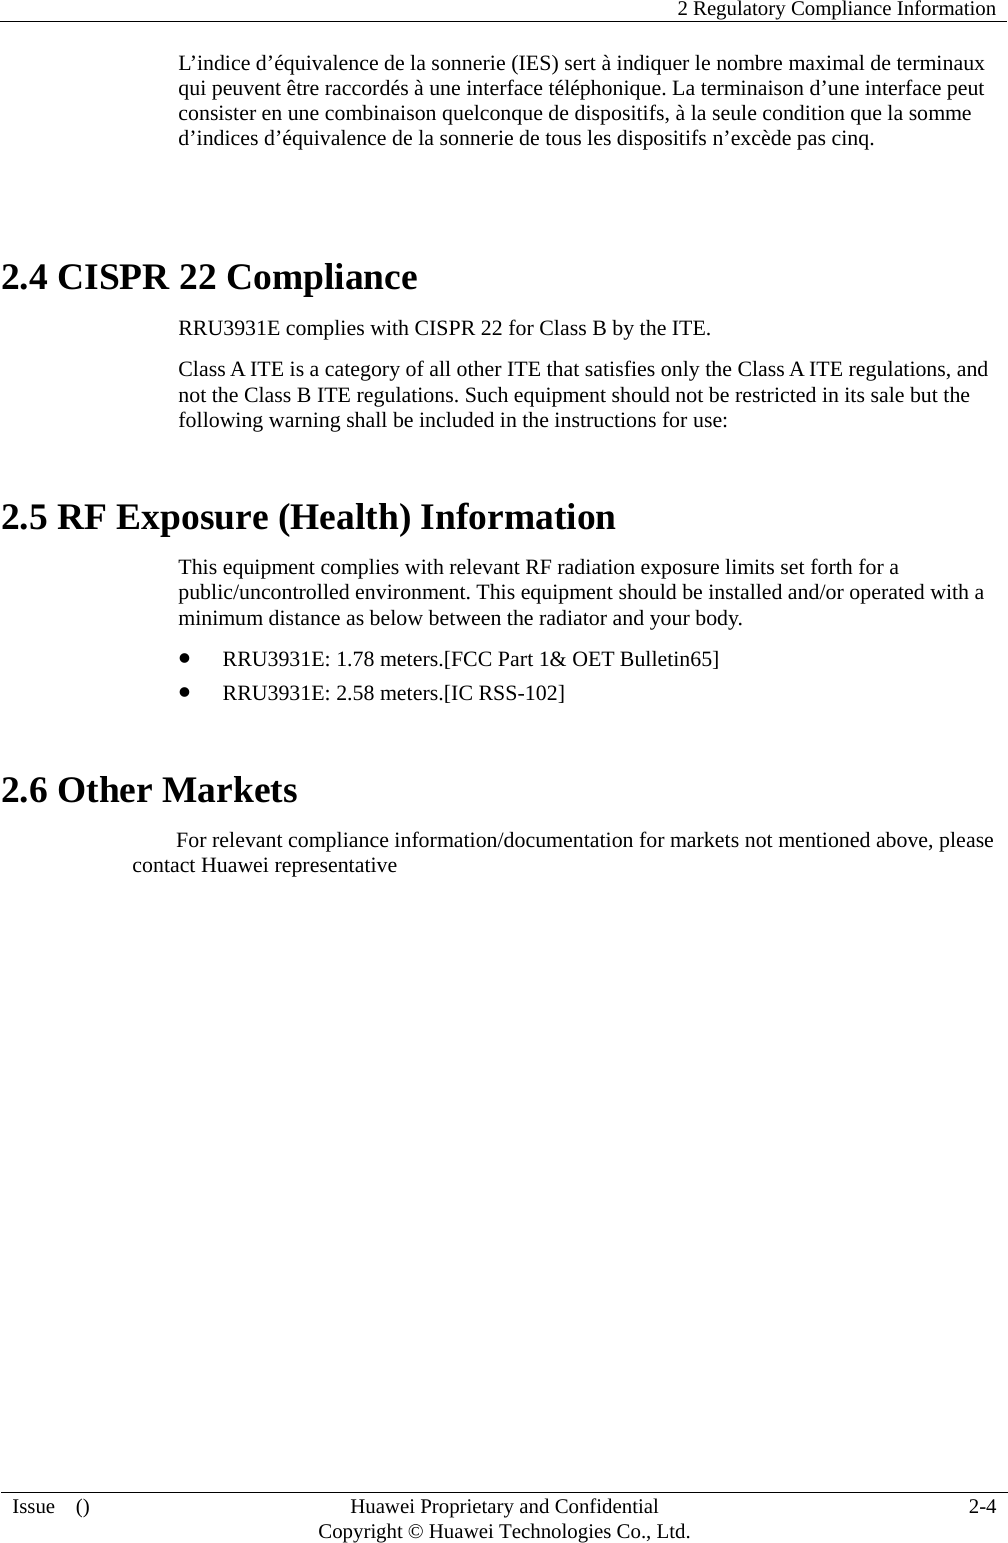    2 Regulatory Compliance Information Issue  ()  Huawei Proprietary and Confidential     Copyright © Huawei Technologies Co., Ltd. 2-4 L’indice d’équivalence de la sonnerie (IES) sert à indiquer le nombre maximal de terminaux qui peuvent être raccordés à une interface téléphonique. La terminaison d’une interface peut consister en une combinaison quelconque de dispositifs, à la seule condition que la somme d’indices d’équivalence de la sonnerie de tous les dispositifs n’excède pas cinq.  2.4 CISPR 22 Compliance RRU3931E complies with CISPR 22 for Class B by the ITE. Class A ITE is a category of all other ITE that satisfies only the Class A ITE regulations, and not the Class B ITE regulations. Such equipment should not be restricted in its sale but the following warning shall be included in the instructions for use: 2.5 RF Exposure (Health) Information This equipment complies with relevant RF radiation exposure limits set forth for a public/uncontrolled environment. This equipment should be installed and/or operated with a minimum distance as below between the radiator and your body.   z RRU3931E: 1.78 meters.[FCC Part 1&amp; OET Bulletin65] z RRU3931E: 2.58 meters.[IC RSS-102] 2.6 Other Markets For relevant compliance information/documentation for markets not mentioned above, please contact Huawei representative 